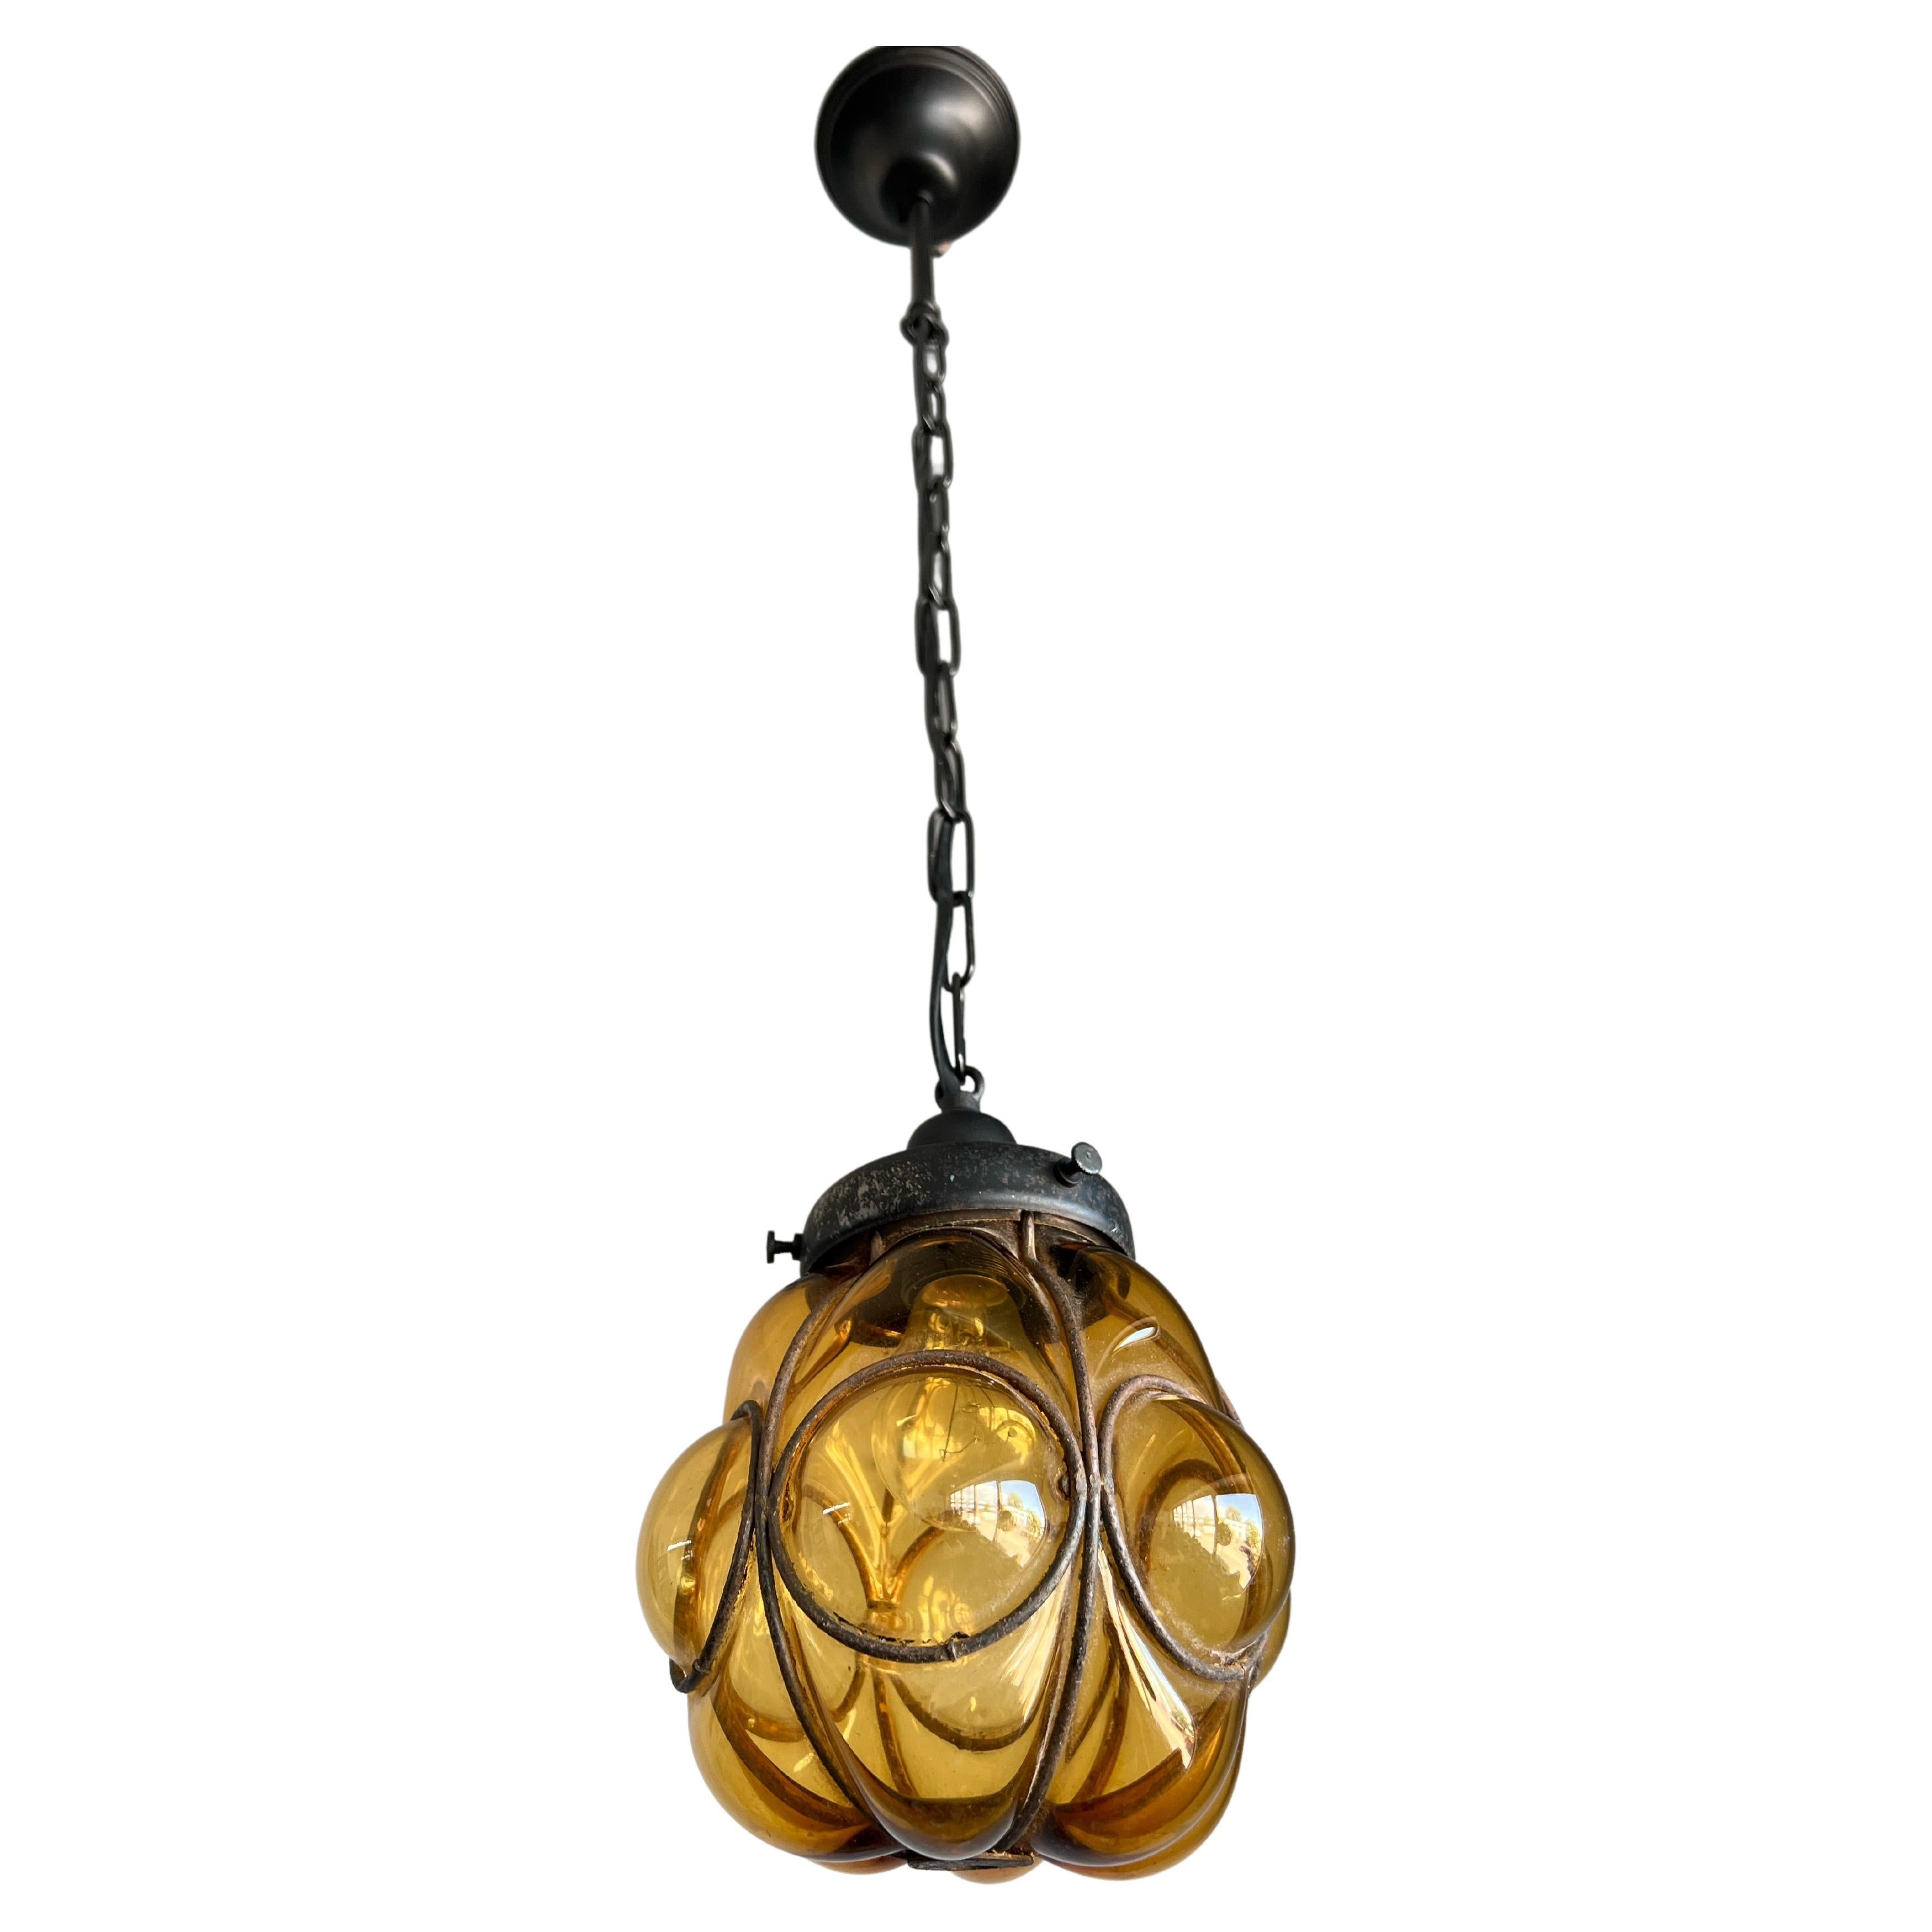 Smallest Venetian Hall Pendant Light, Mouth Blown Glass into Wrought Iron Frame For Sale